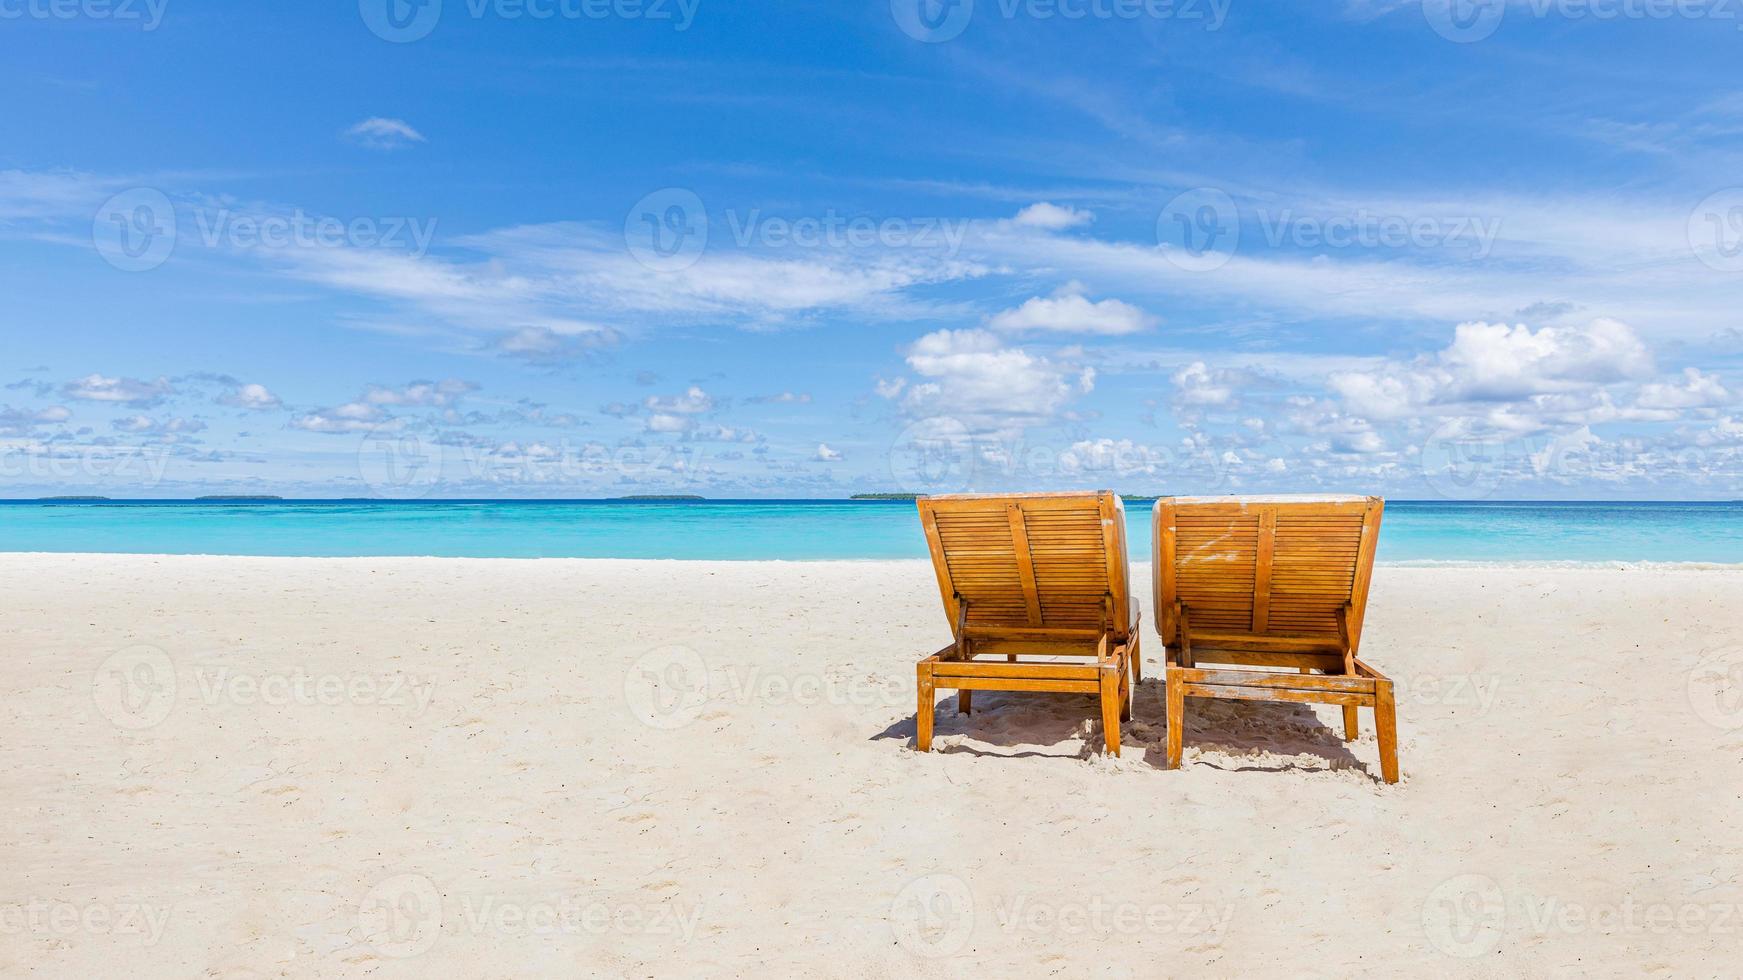 Chaise lounge on beach. Beautiful beach. Chairs on the sandy beach near the sea. Summer holiday and vacation concept for tourism. Inspirational tropical landscape photo